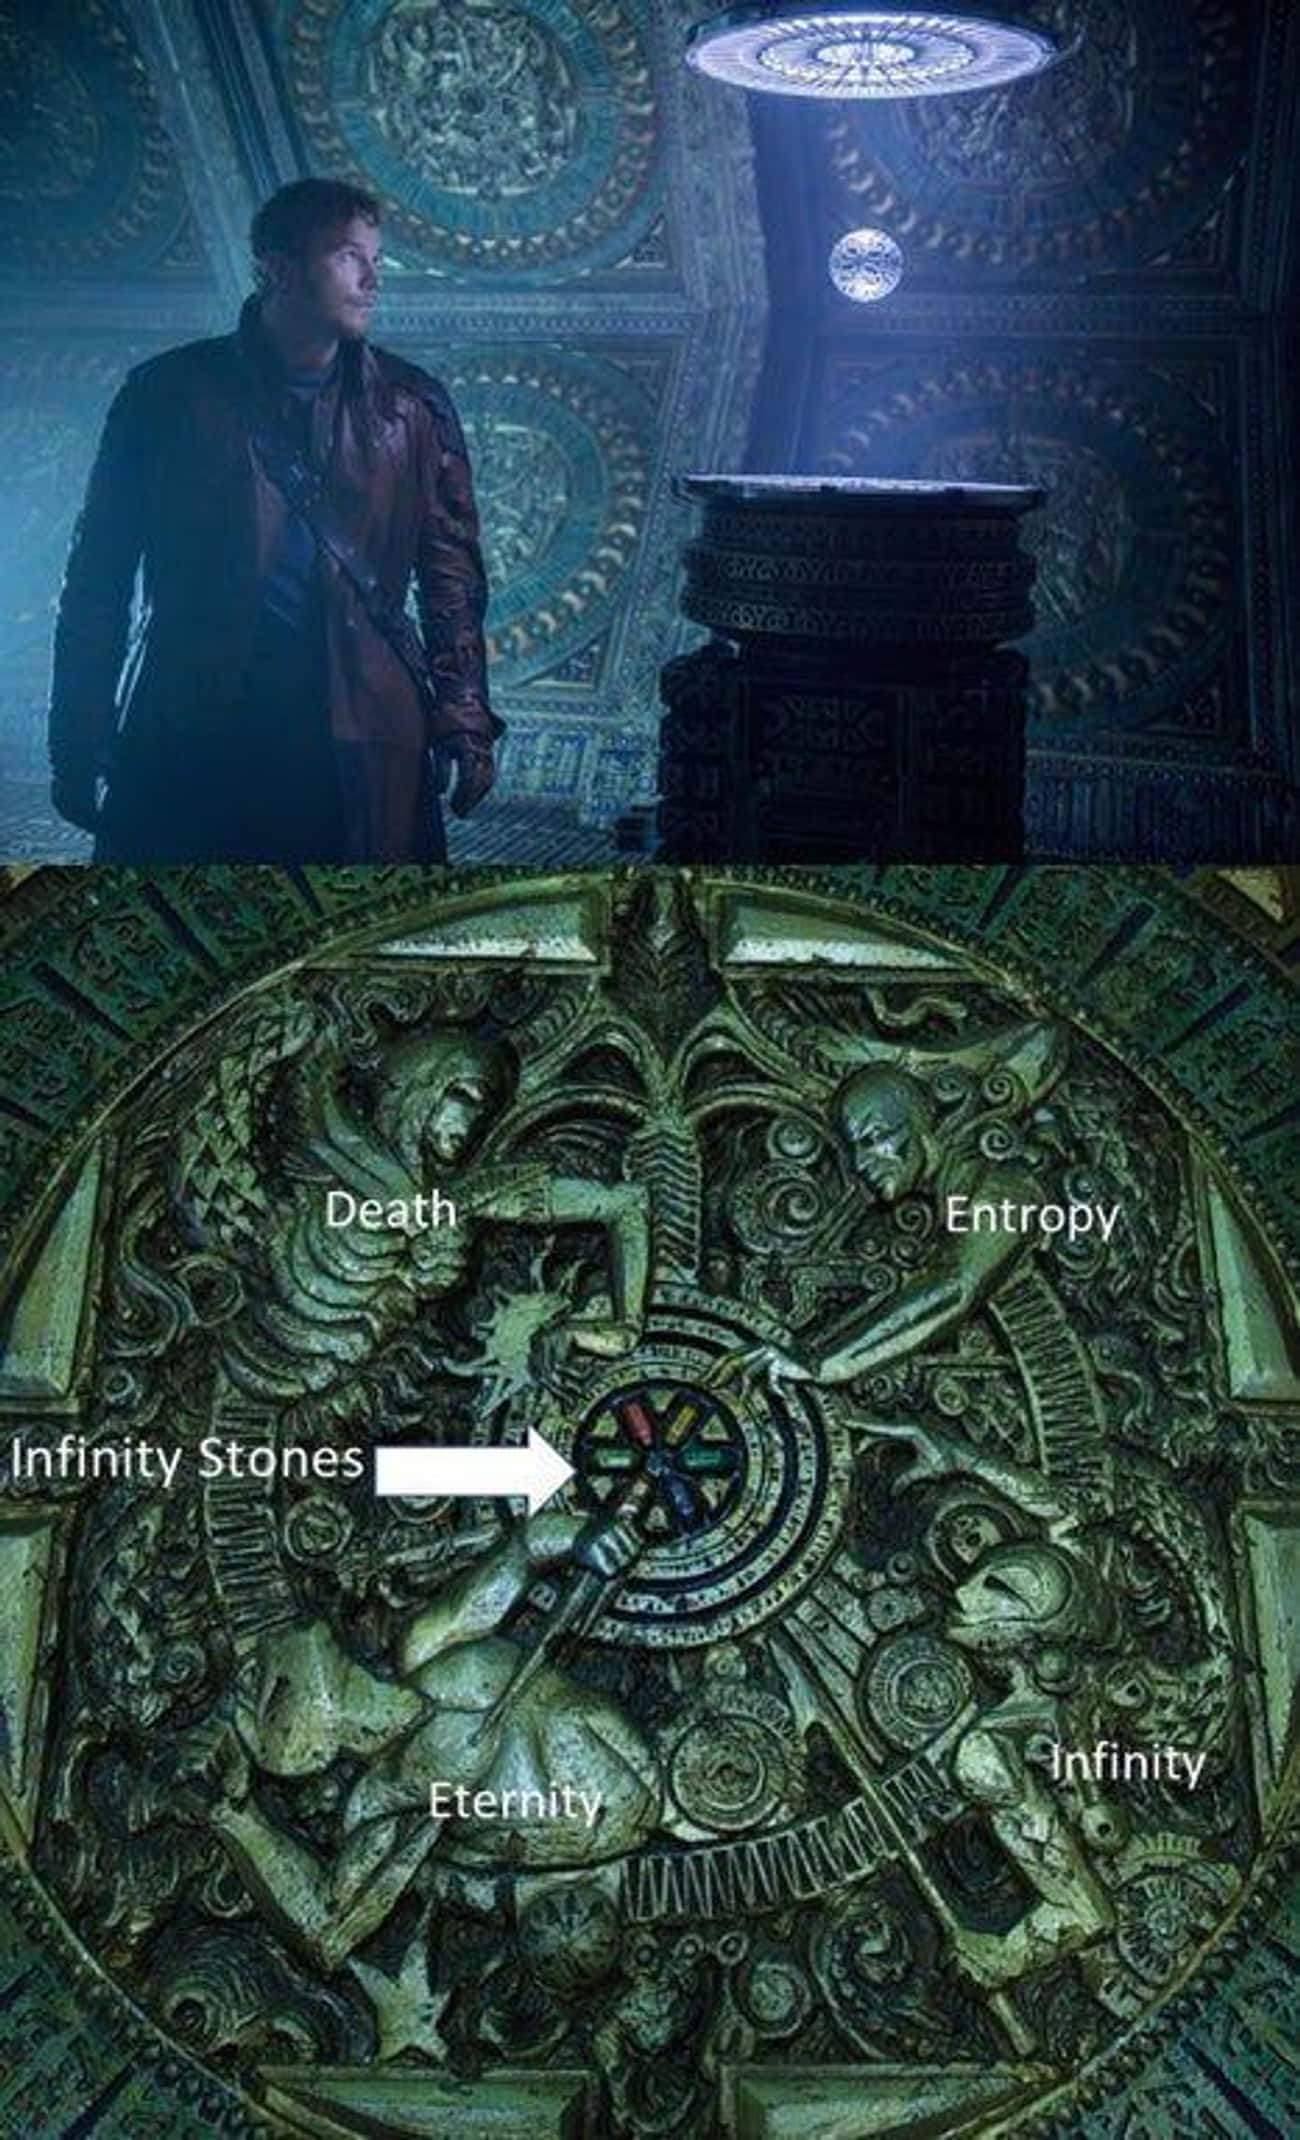 When Peter Quill enters the temple on Morag, the carvings on the wall are of Death, Entropy, Infinity, and Eternity: the Cosmic Entities who created the Infinity Stones.